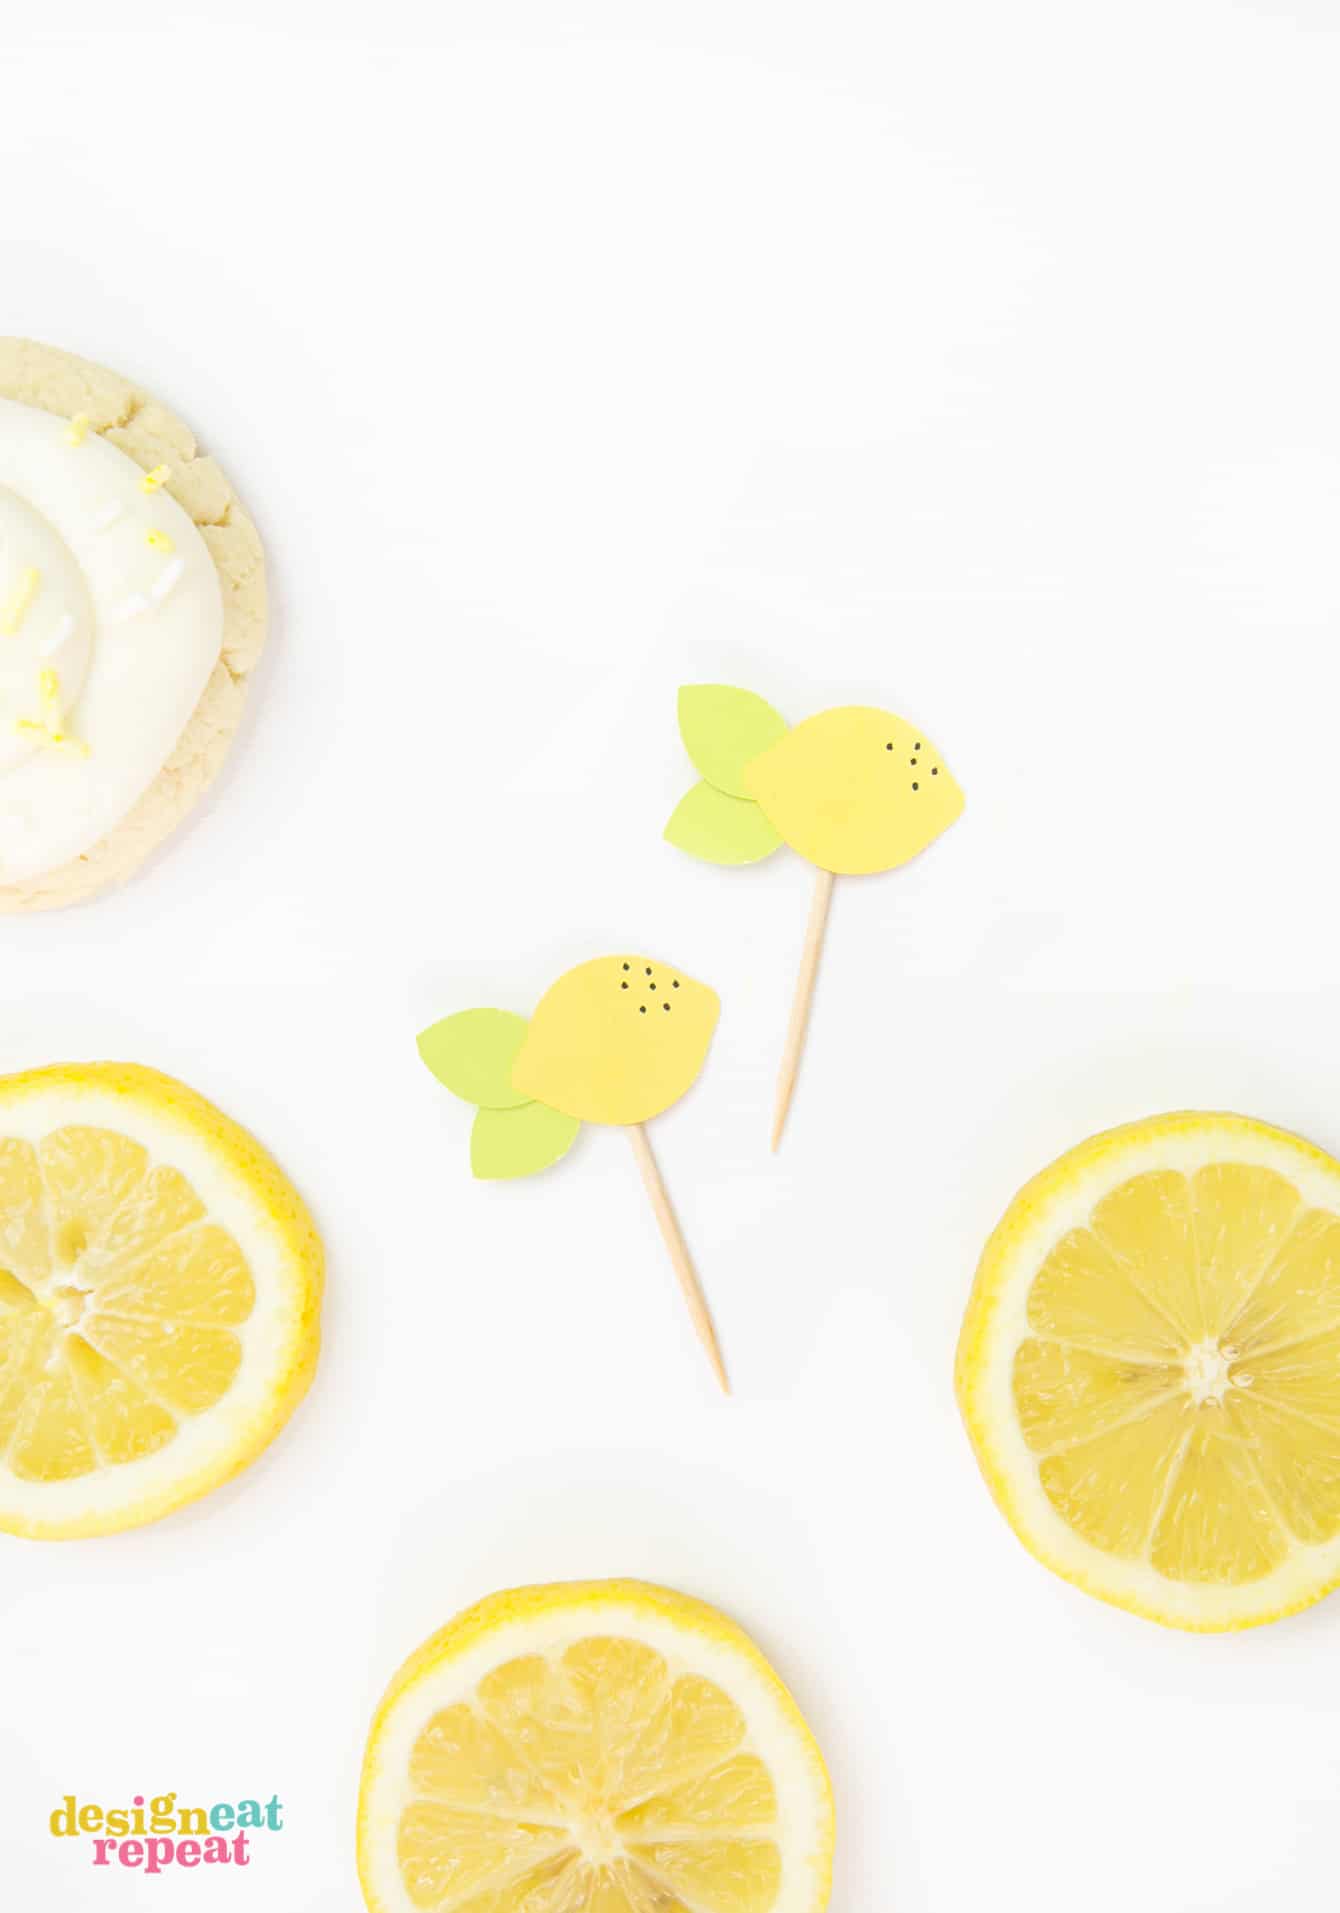 Lemon toppers on toothpicks to decorate thick lemon sugar cookies.